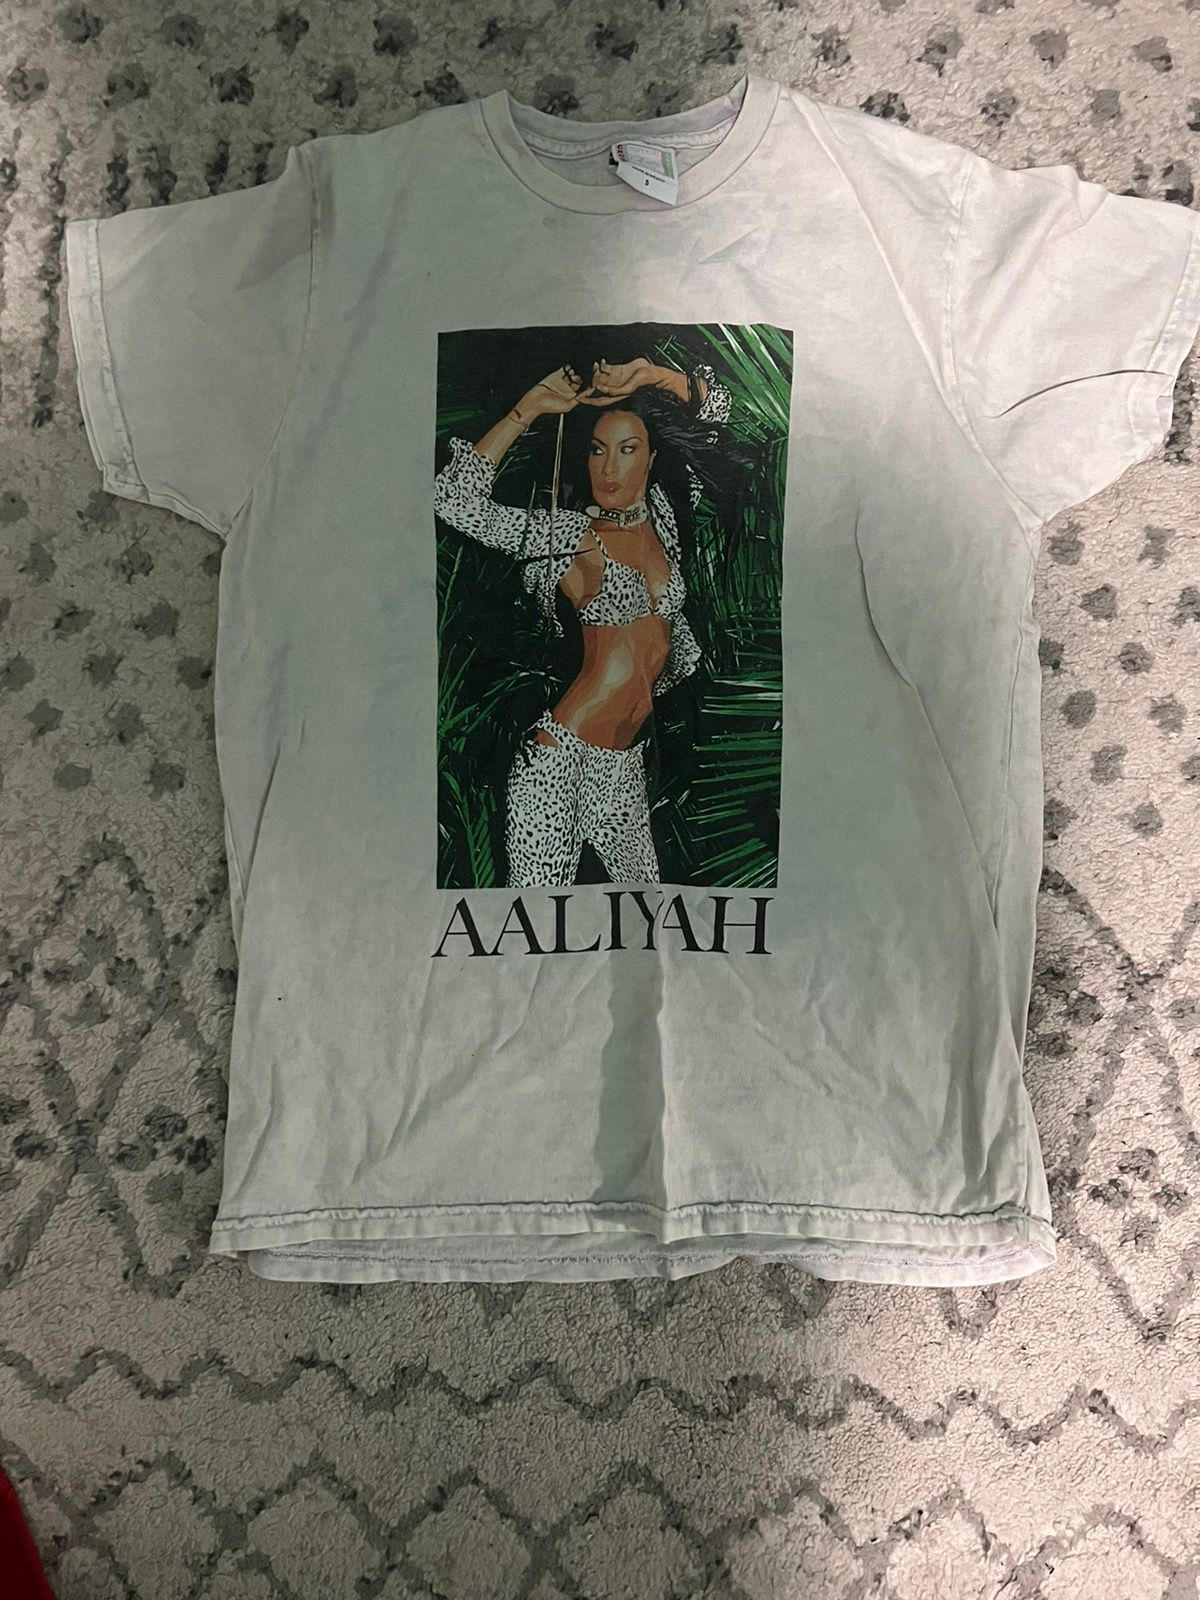 Pacsun Aaliyah graphic Size US S / EU 44-46 / 1 - 1 Preview